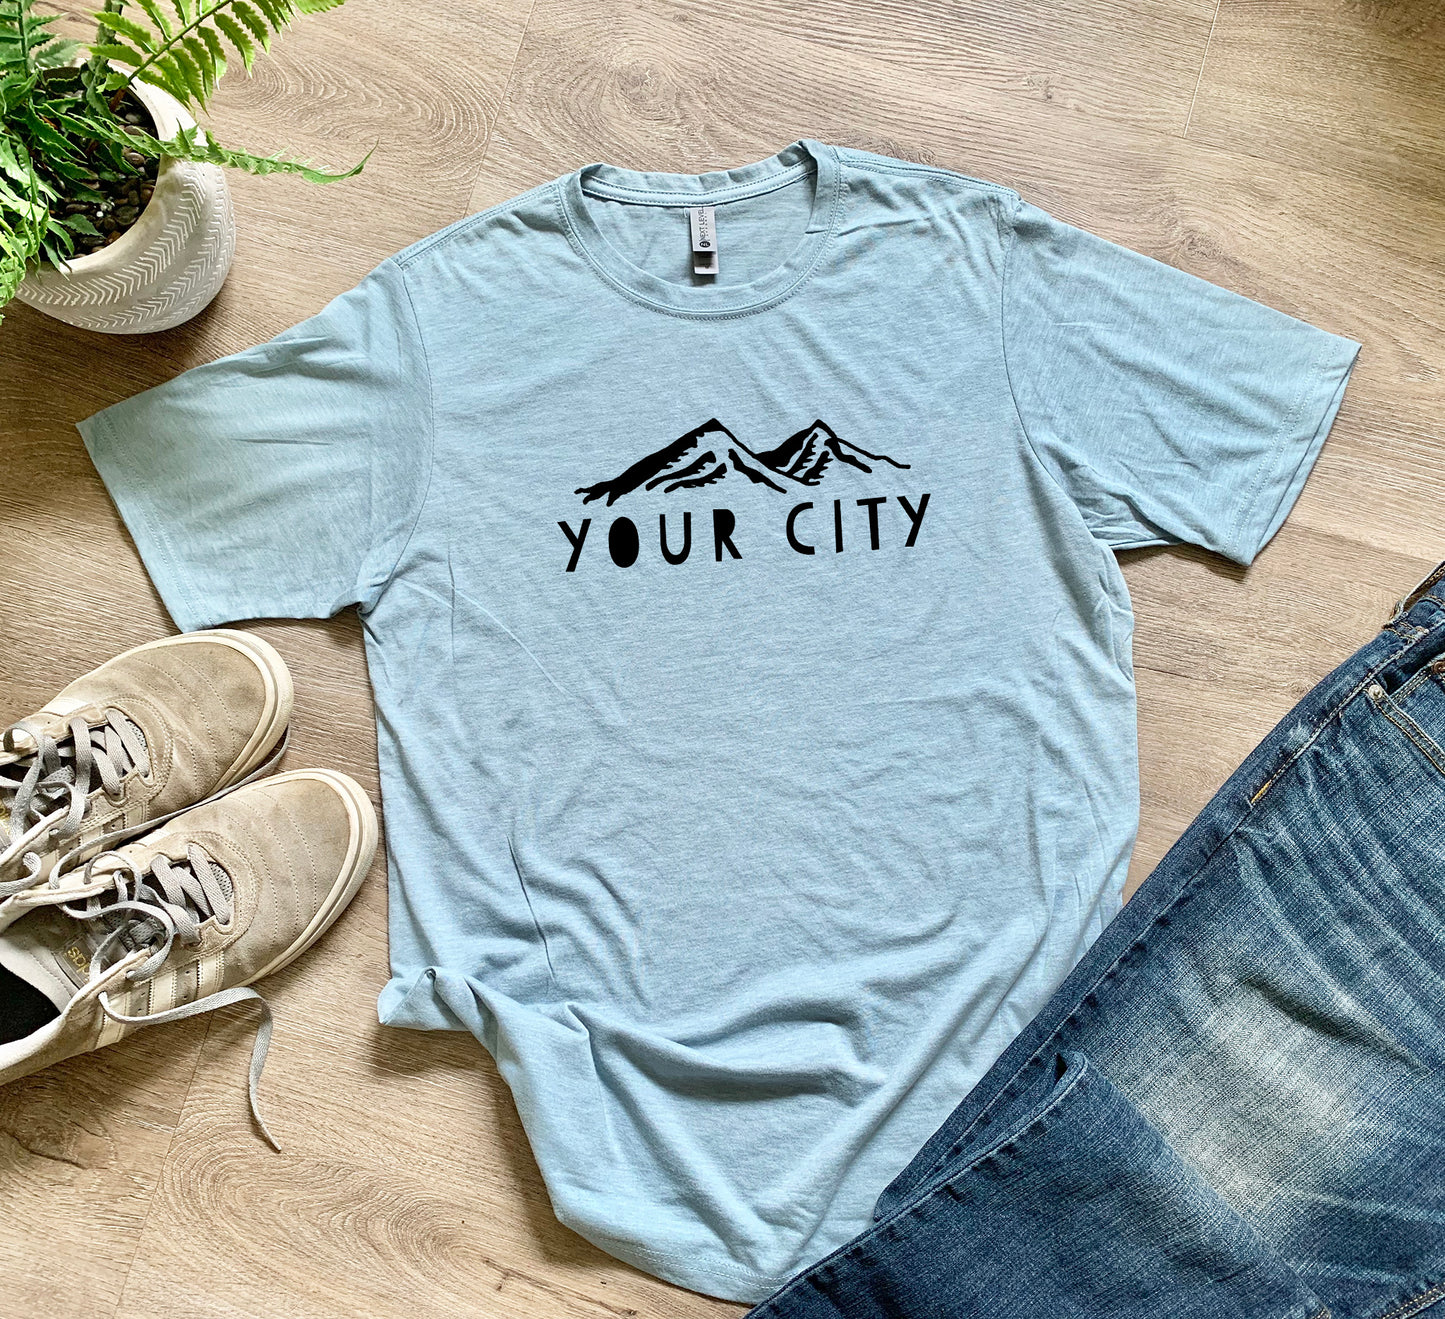 a t - shirt that says your city on it next to a pair of jeans